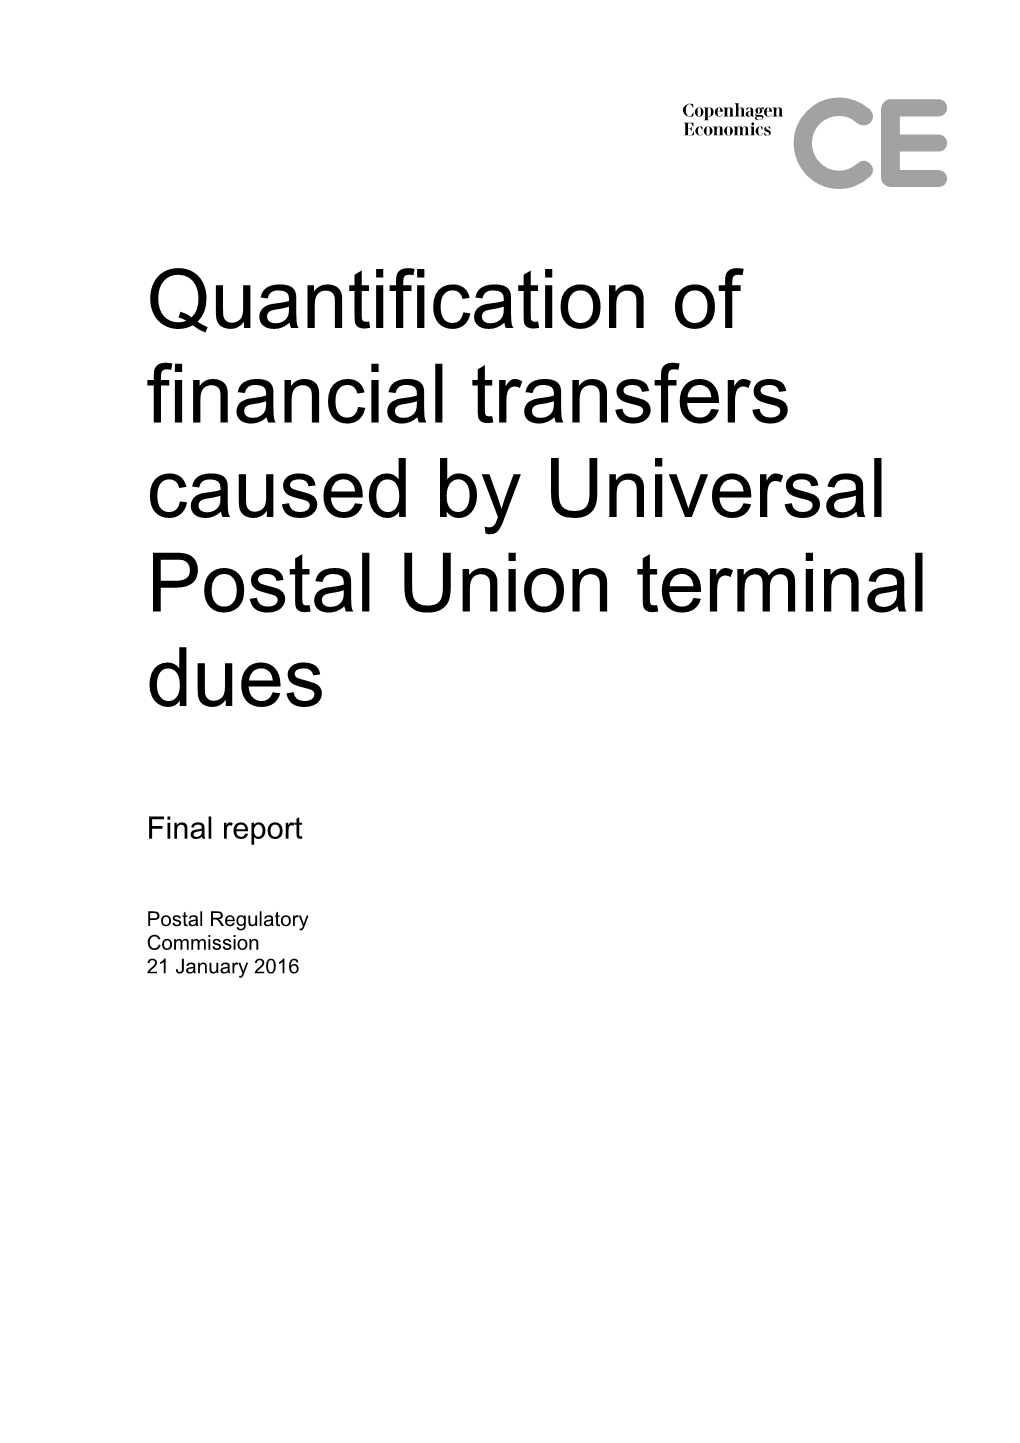 Quantification of Financial Transfers Caused by Universal Postal Union Terminal Dues